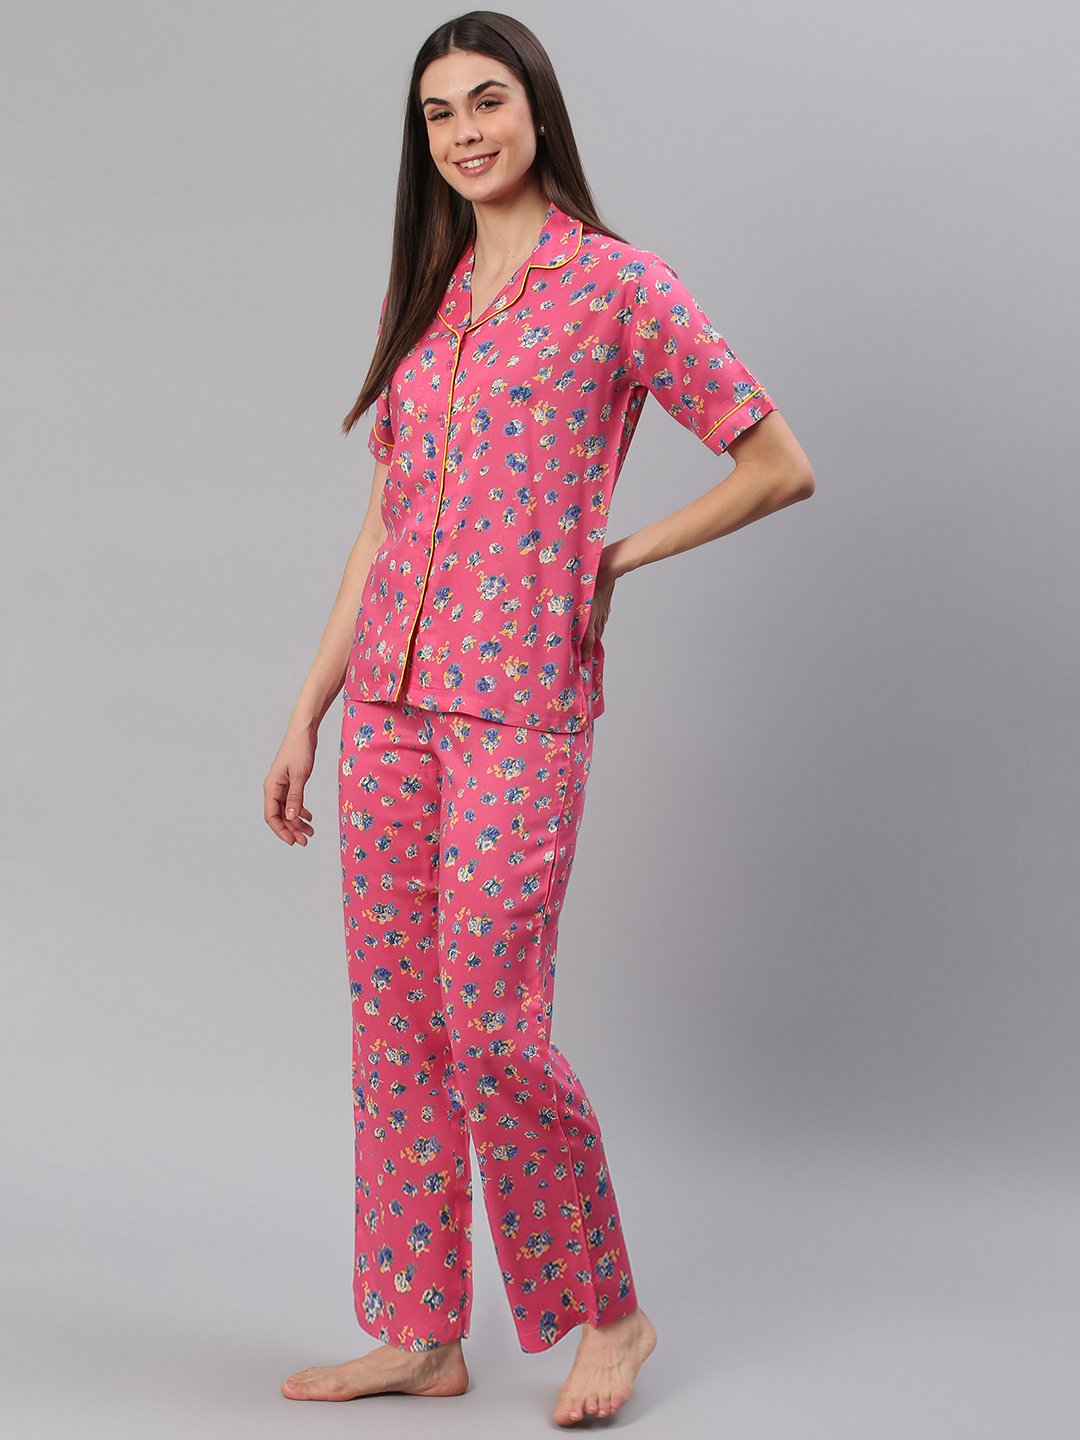 Cation Pink Printed Night Suit